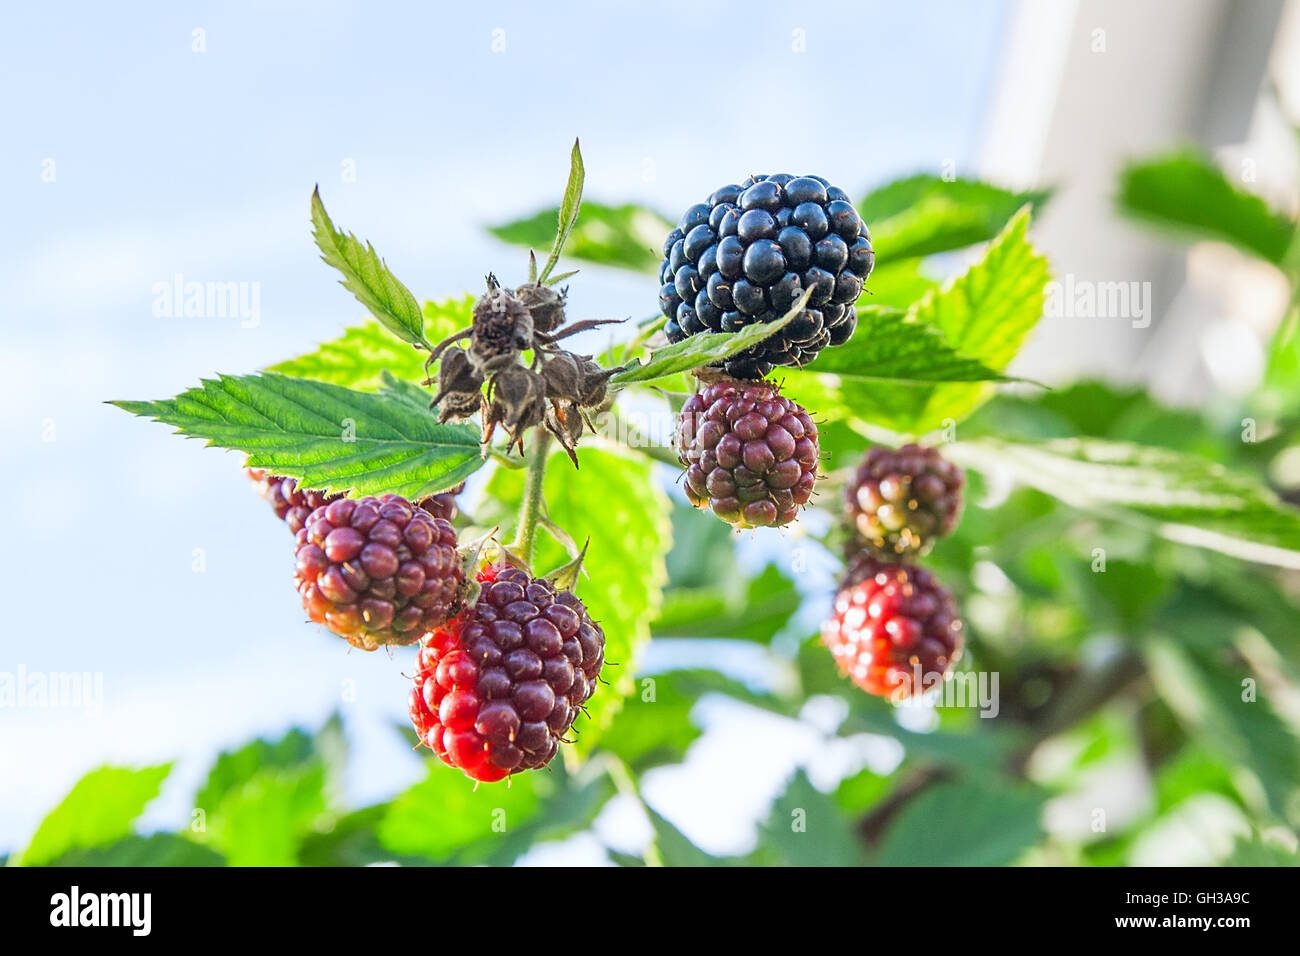 https://c8.alamy.com/comp/GH3A9C/red-and-black-wild-blackberries-bushes-and-branches-on-green-leaves-GH3A9C.jpg